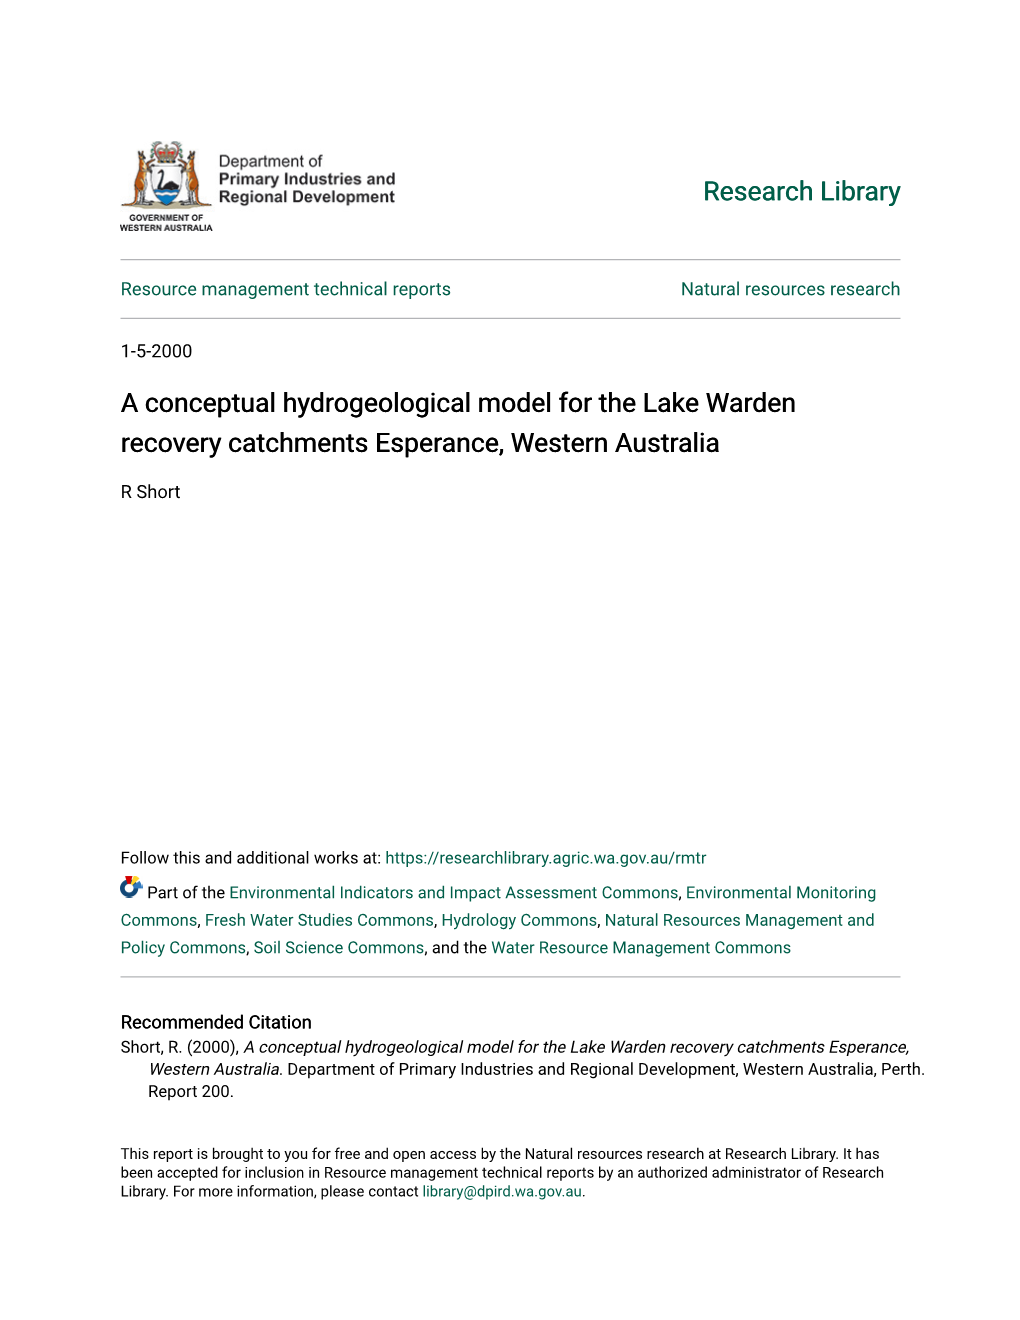 A Conceptual Hydrogeological Model for the Lake Warden Recovery Catchments Esperance, Western Australia